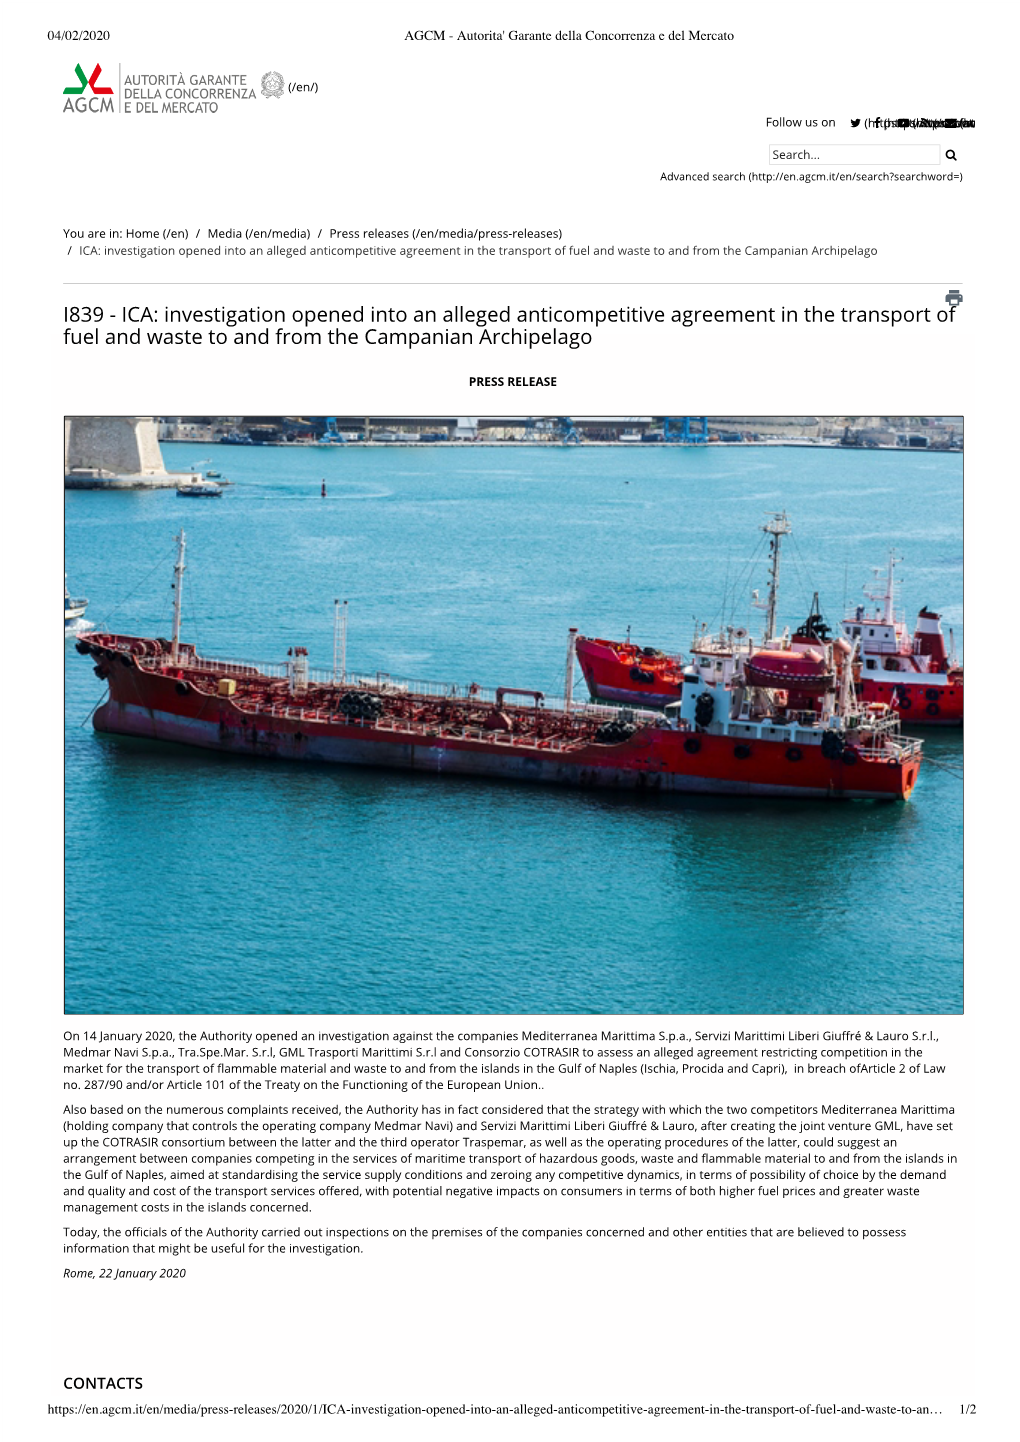 I839 - ICA: Investigation Opened Into an Alleged Anticompetitive Agreement in the Transport of Fuel and Waste to and from the Campanian Archipelago